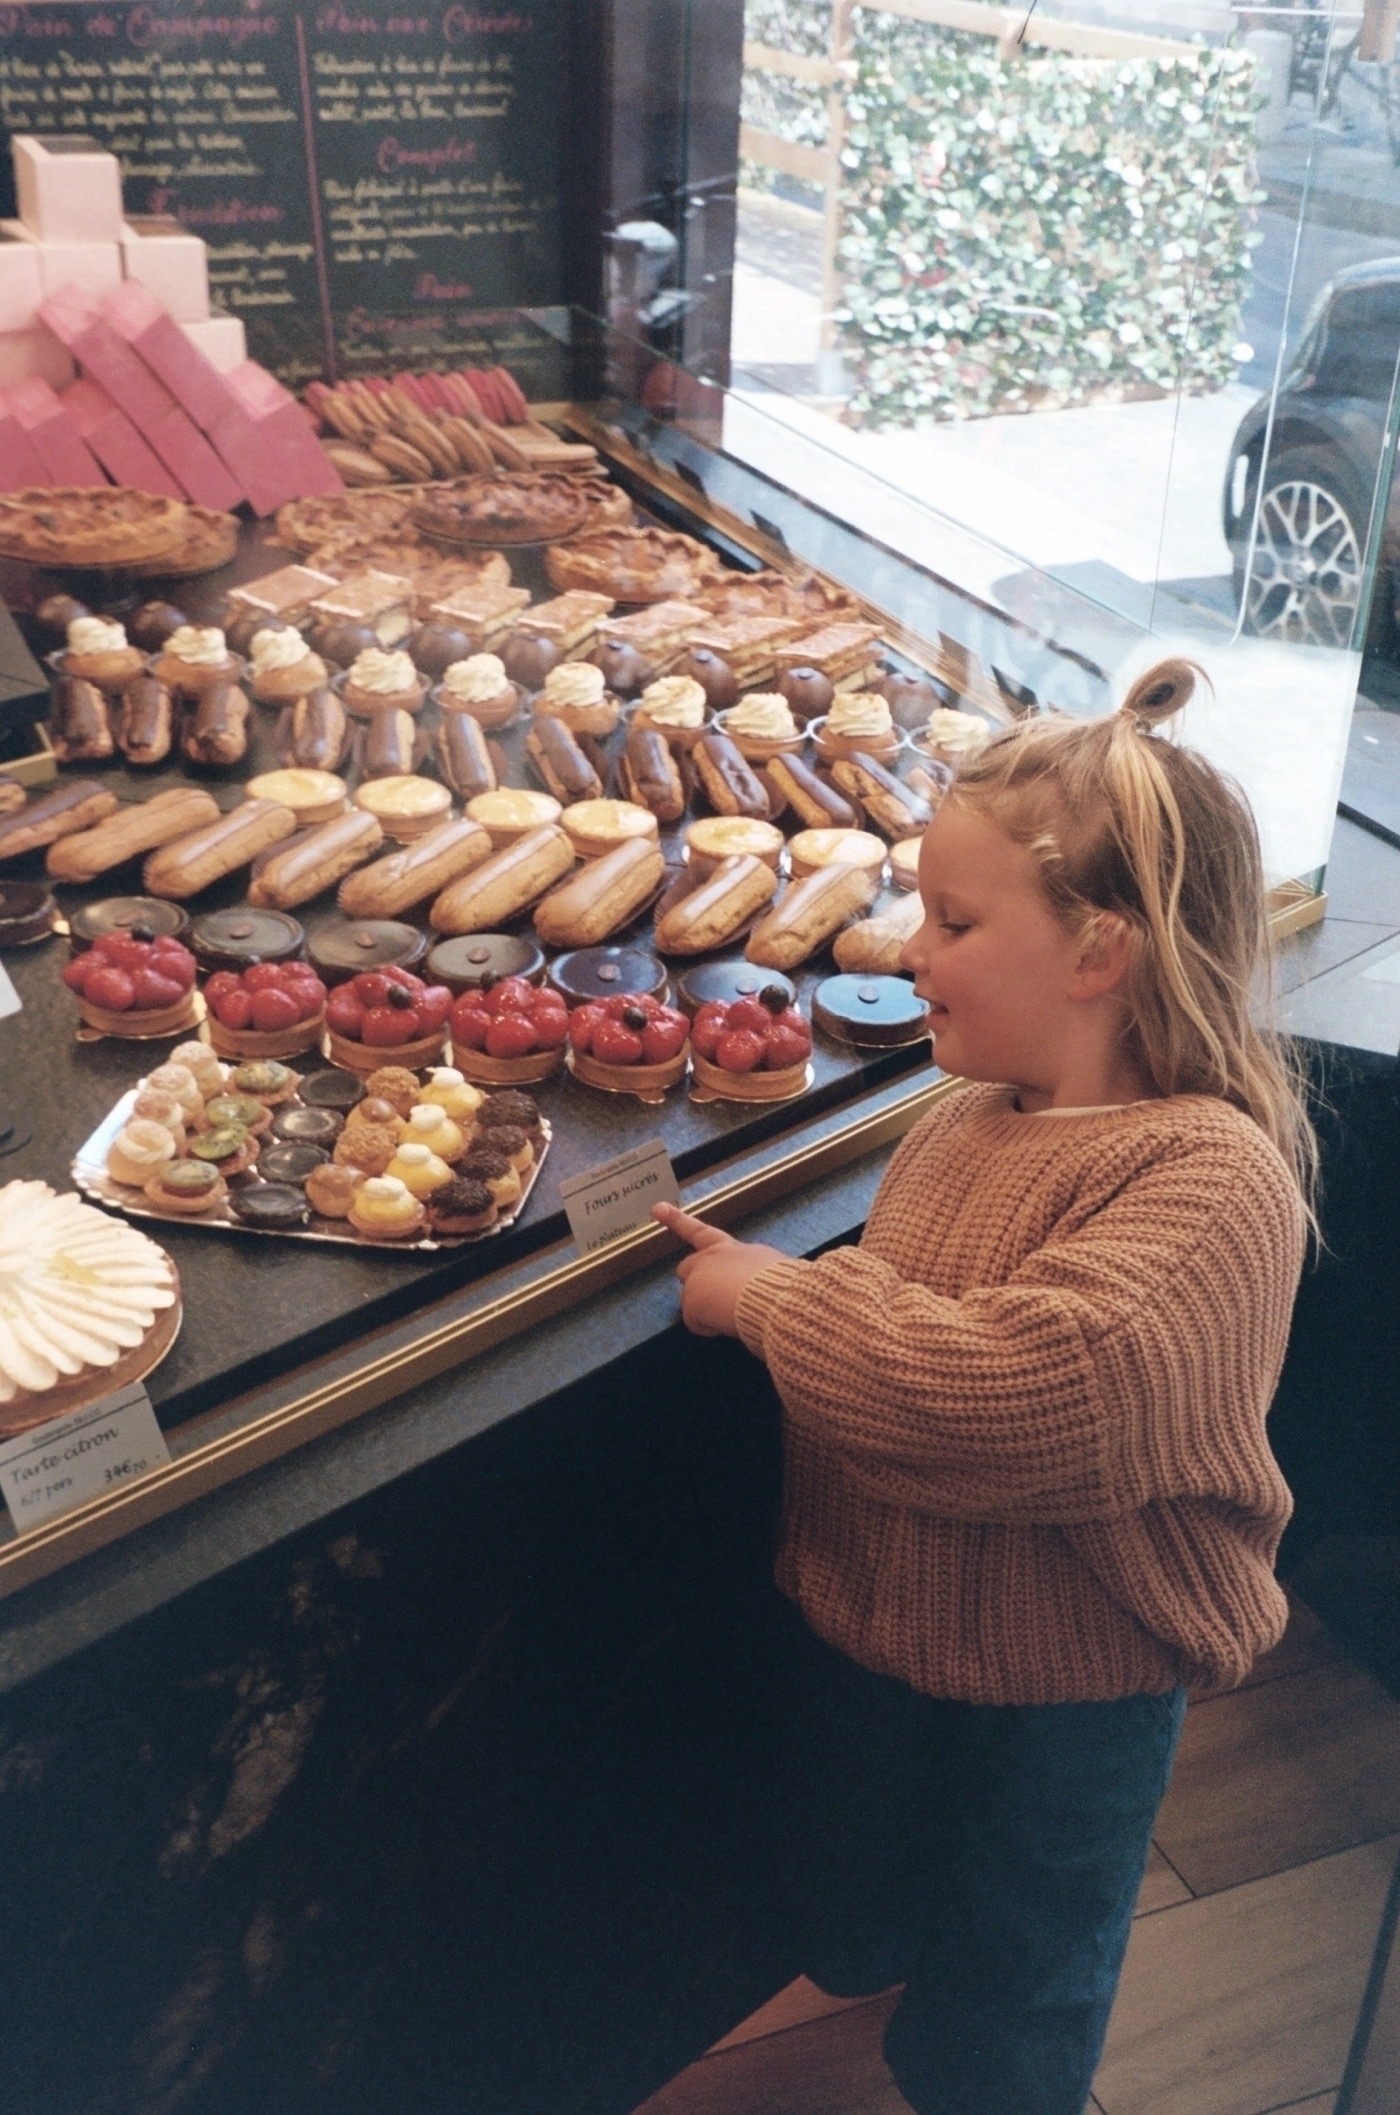 Bakery in Paris with Luna. Photo taken with Leica Z2X in Paris by Josh Withers.